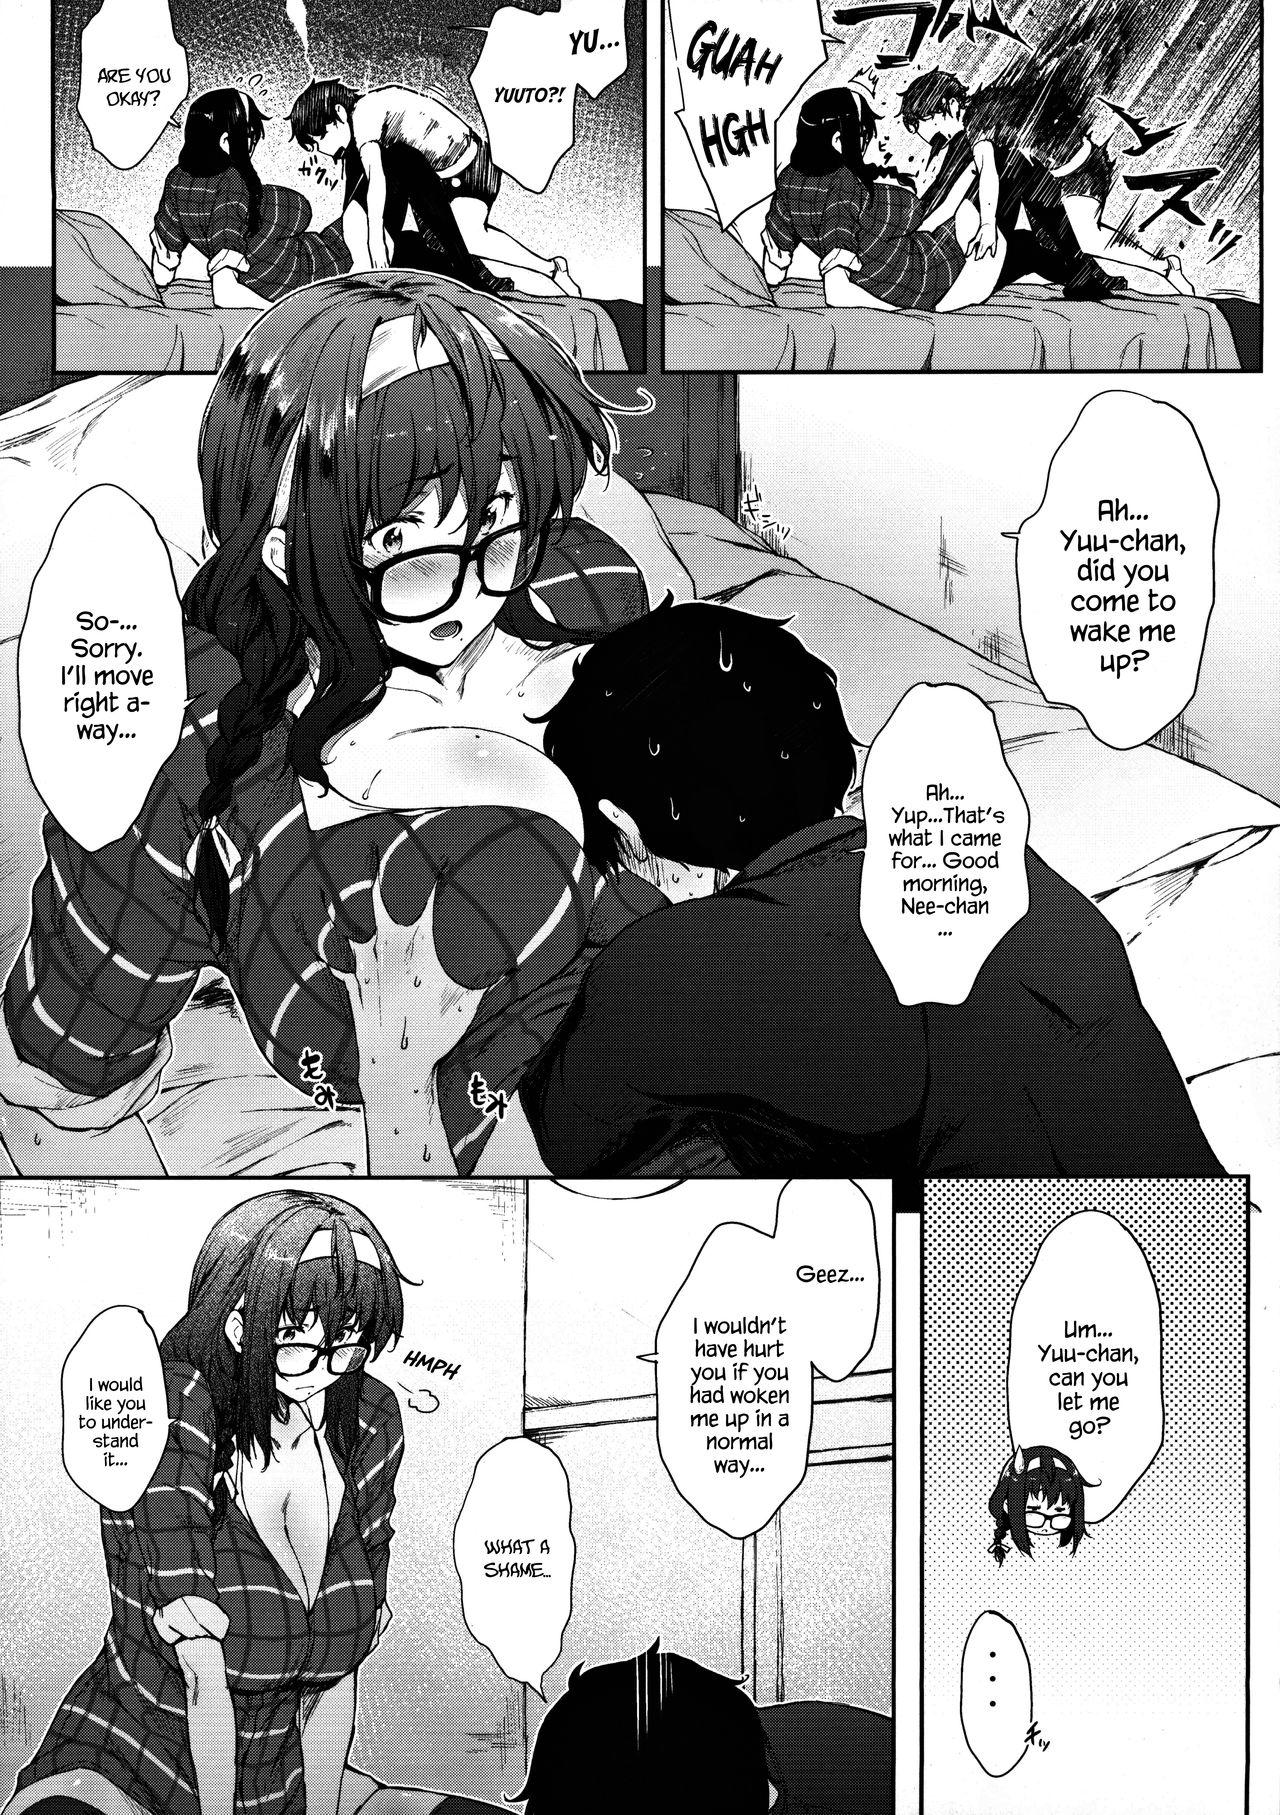 Ejaculations Babaa no Inu Ma ni Nee-chan to | With My Stepsister While My Mom's Not Home - Original Fudendo - Page 5